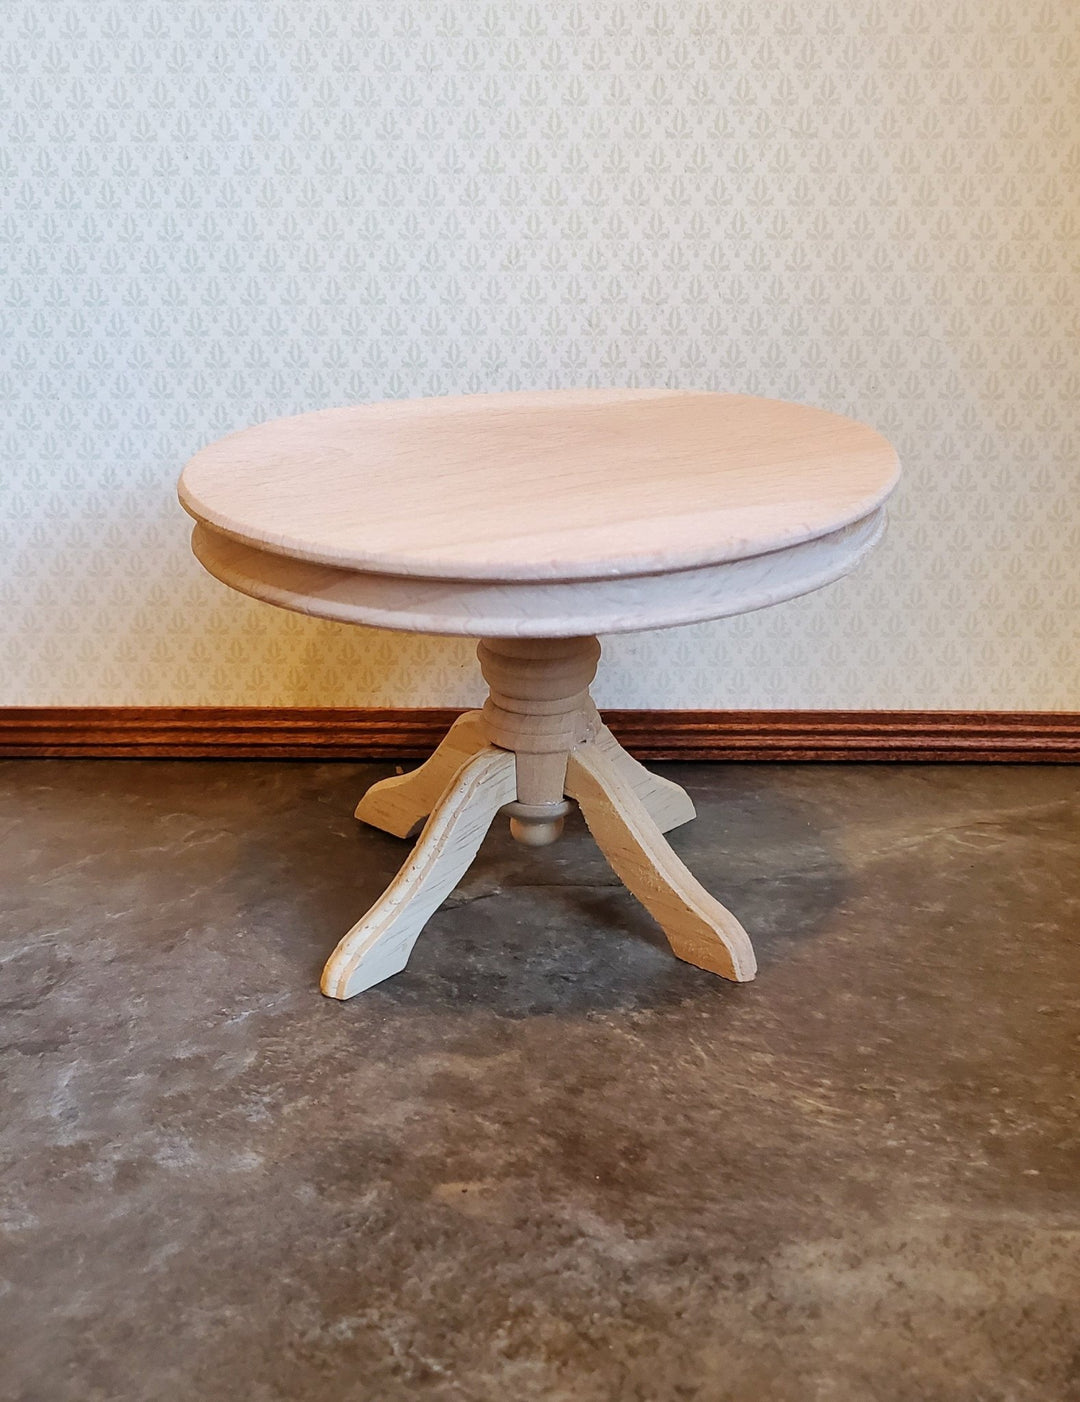 Dollhouse Miniature Table Round Pedestal Unfinished 1:12 Scale Kitchen Dining Room - Miniature Crush